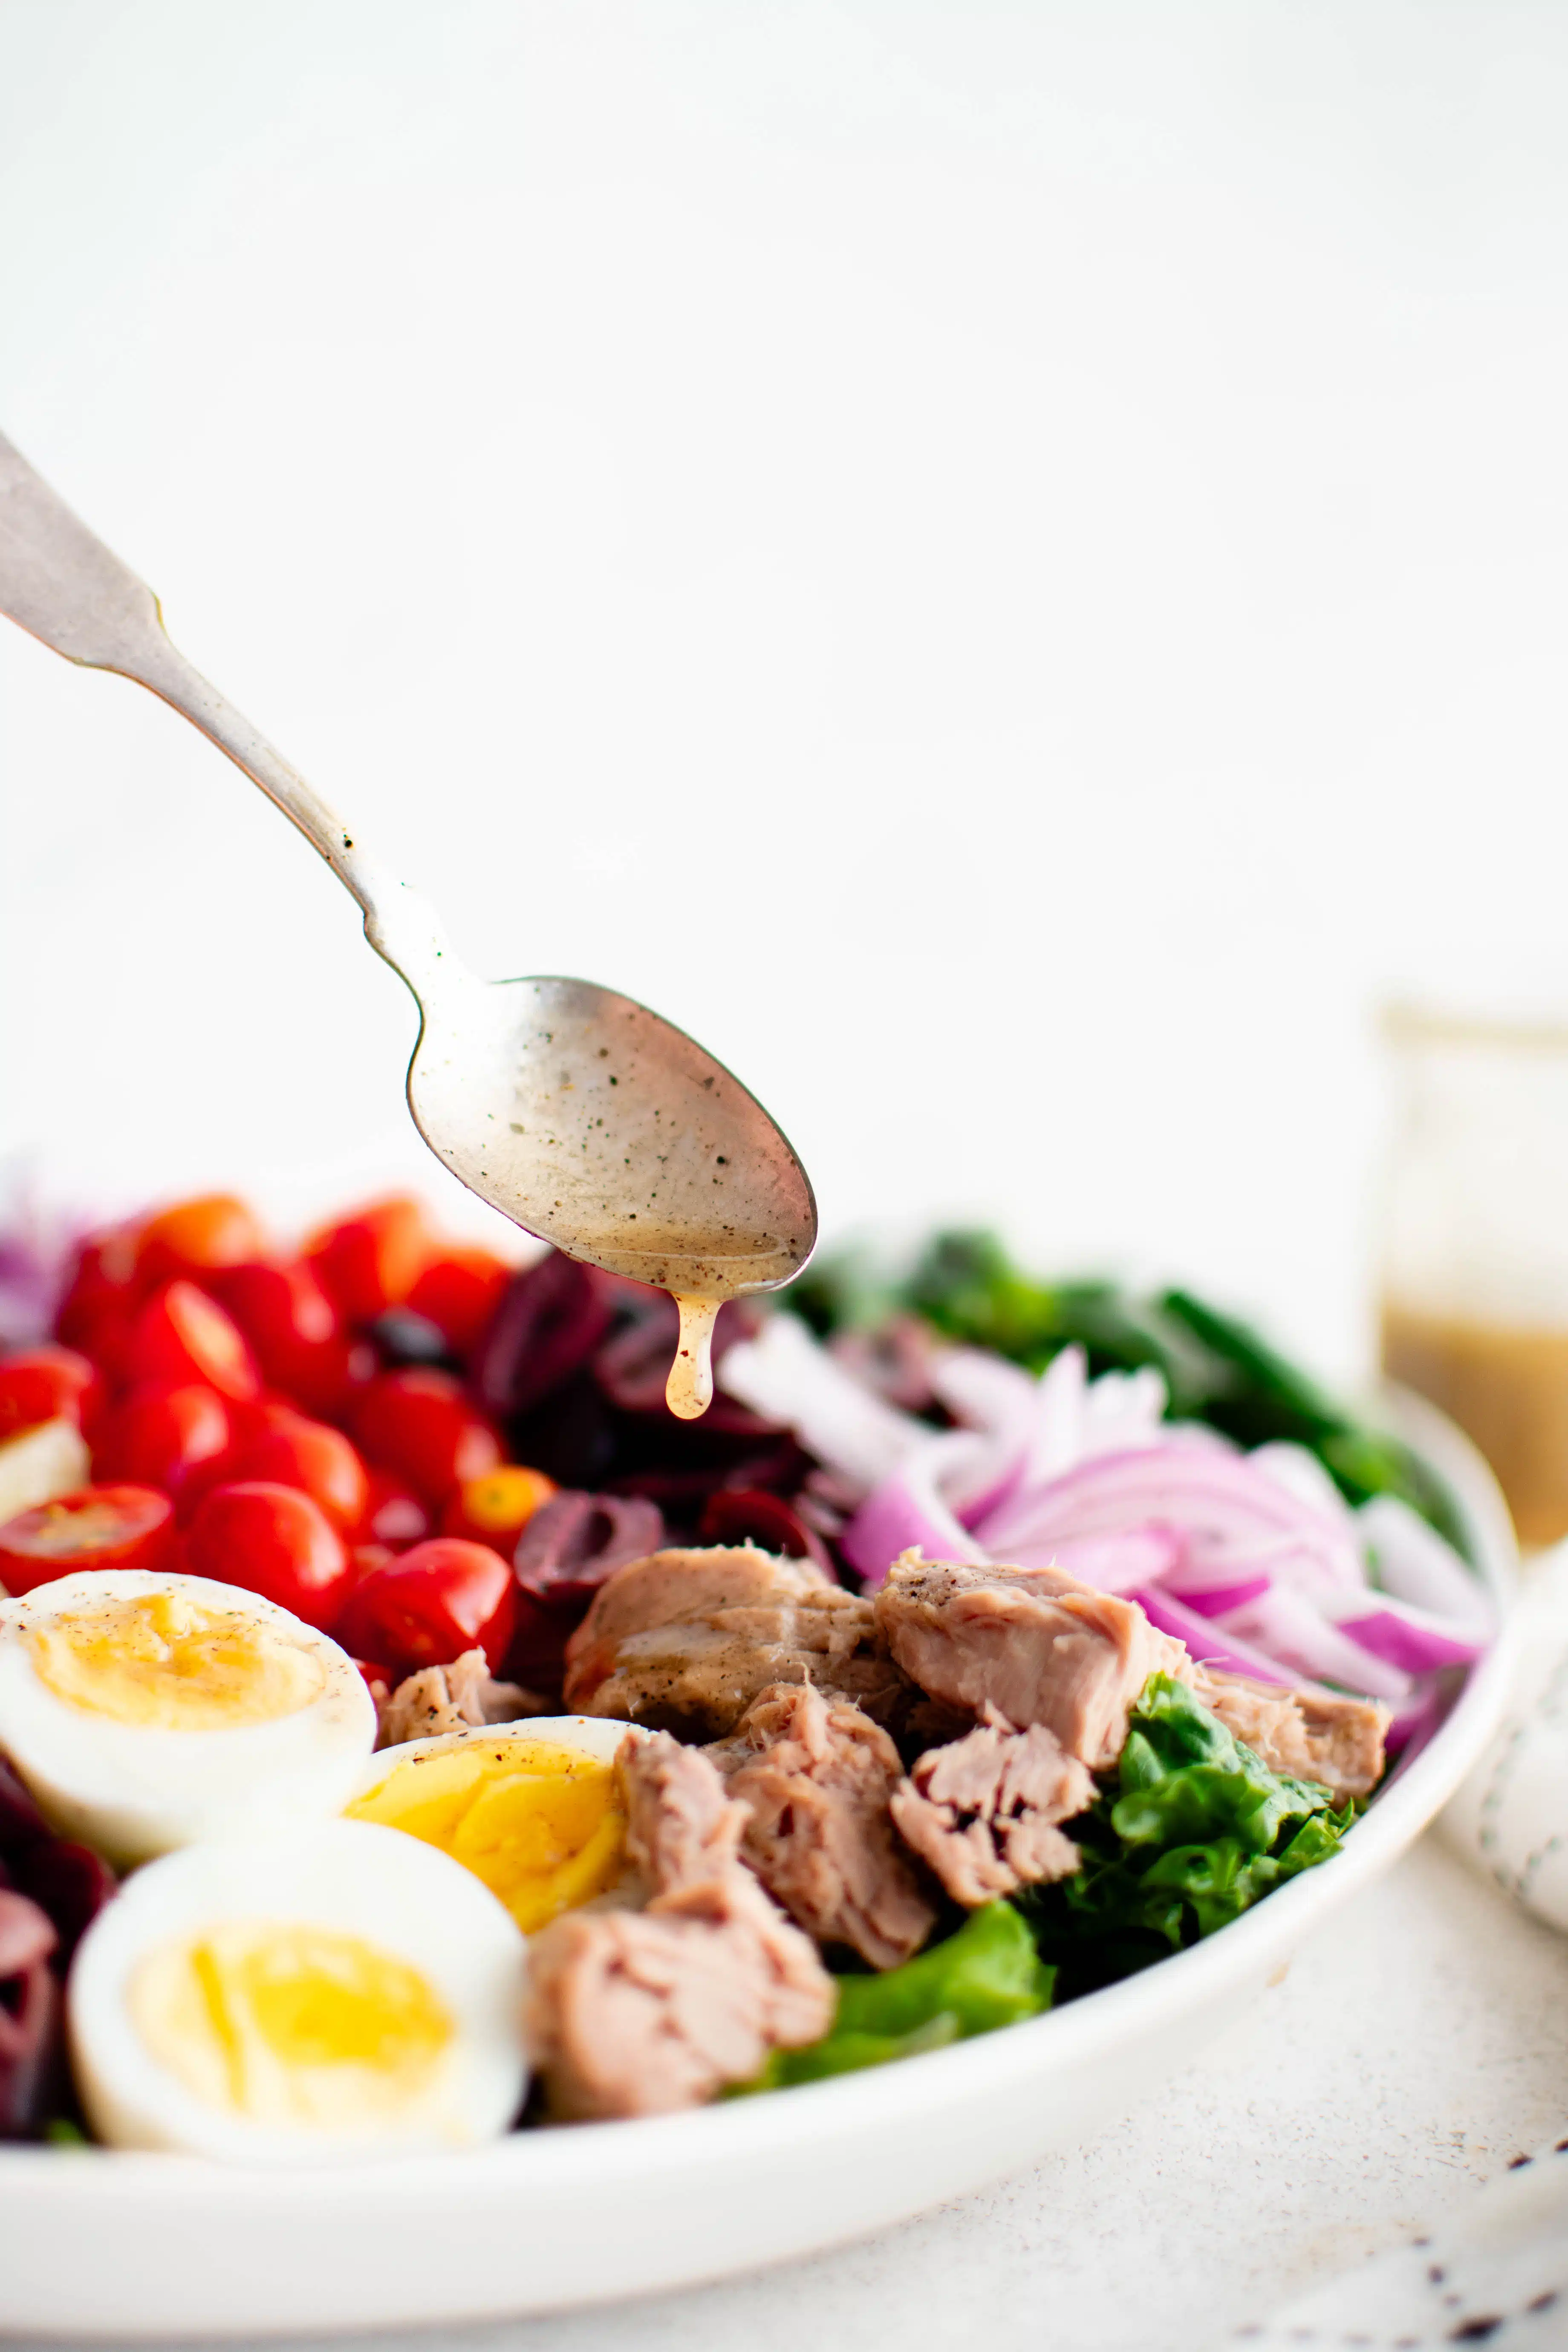 Small spoon drizzling homemade vinaigrette over a large white salad platter artfully presenting nicoise salad.